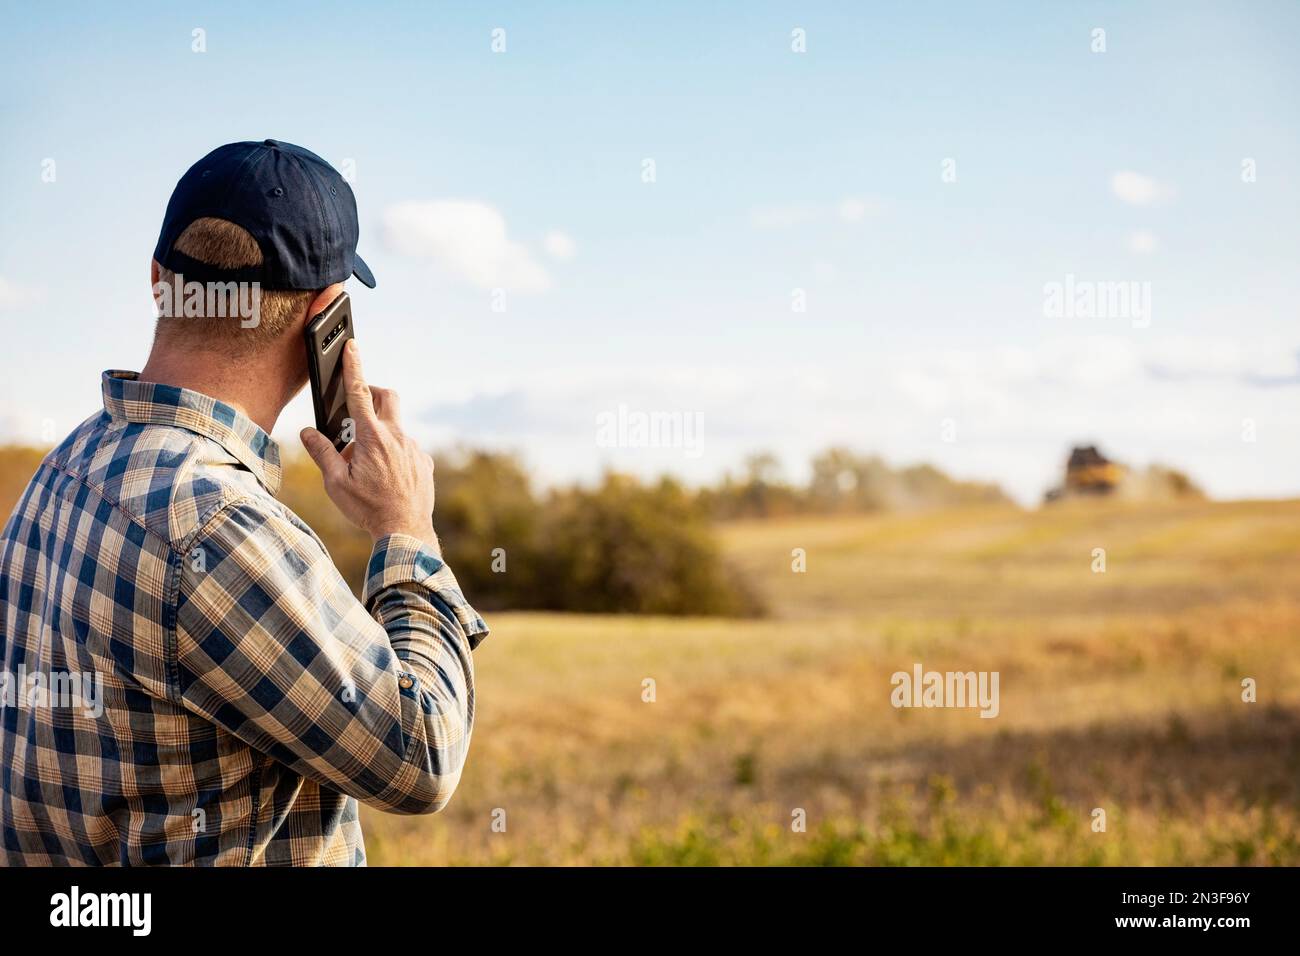 View taken from behind of a man talking on a smart phone while monitoring and completing fall canola harvest; Alcomdale, Alberta, Canada Stock Photo